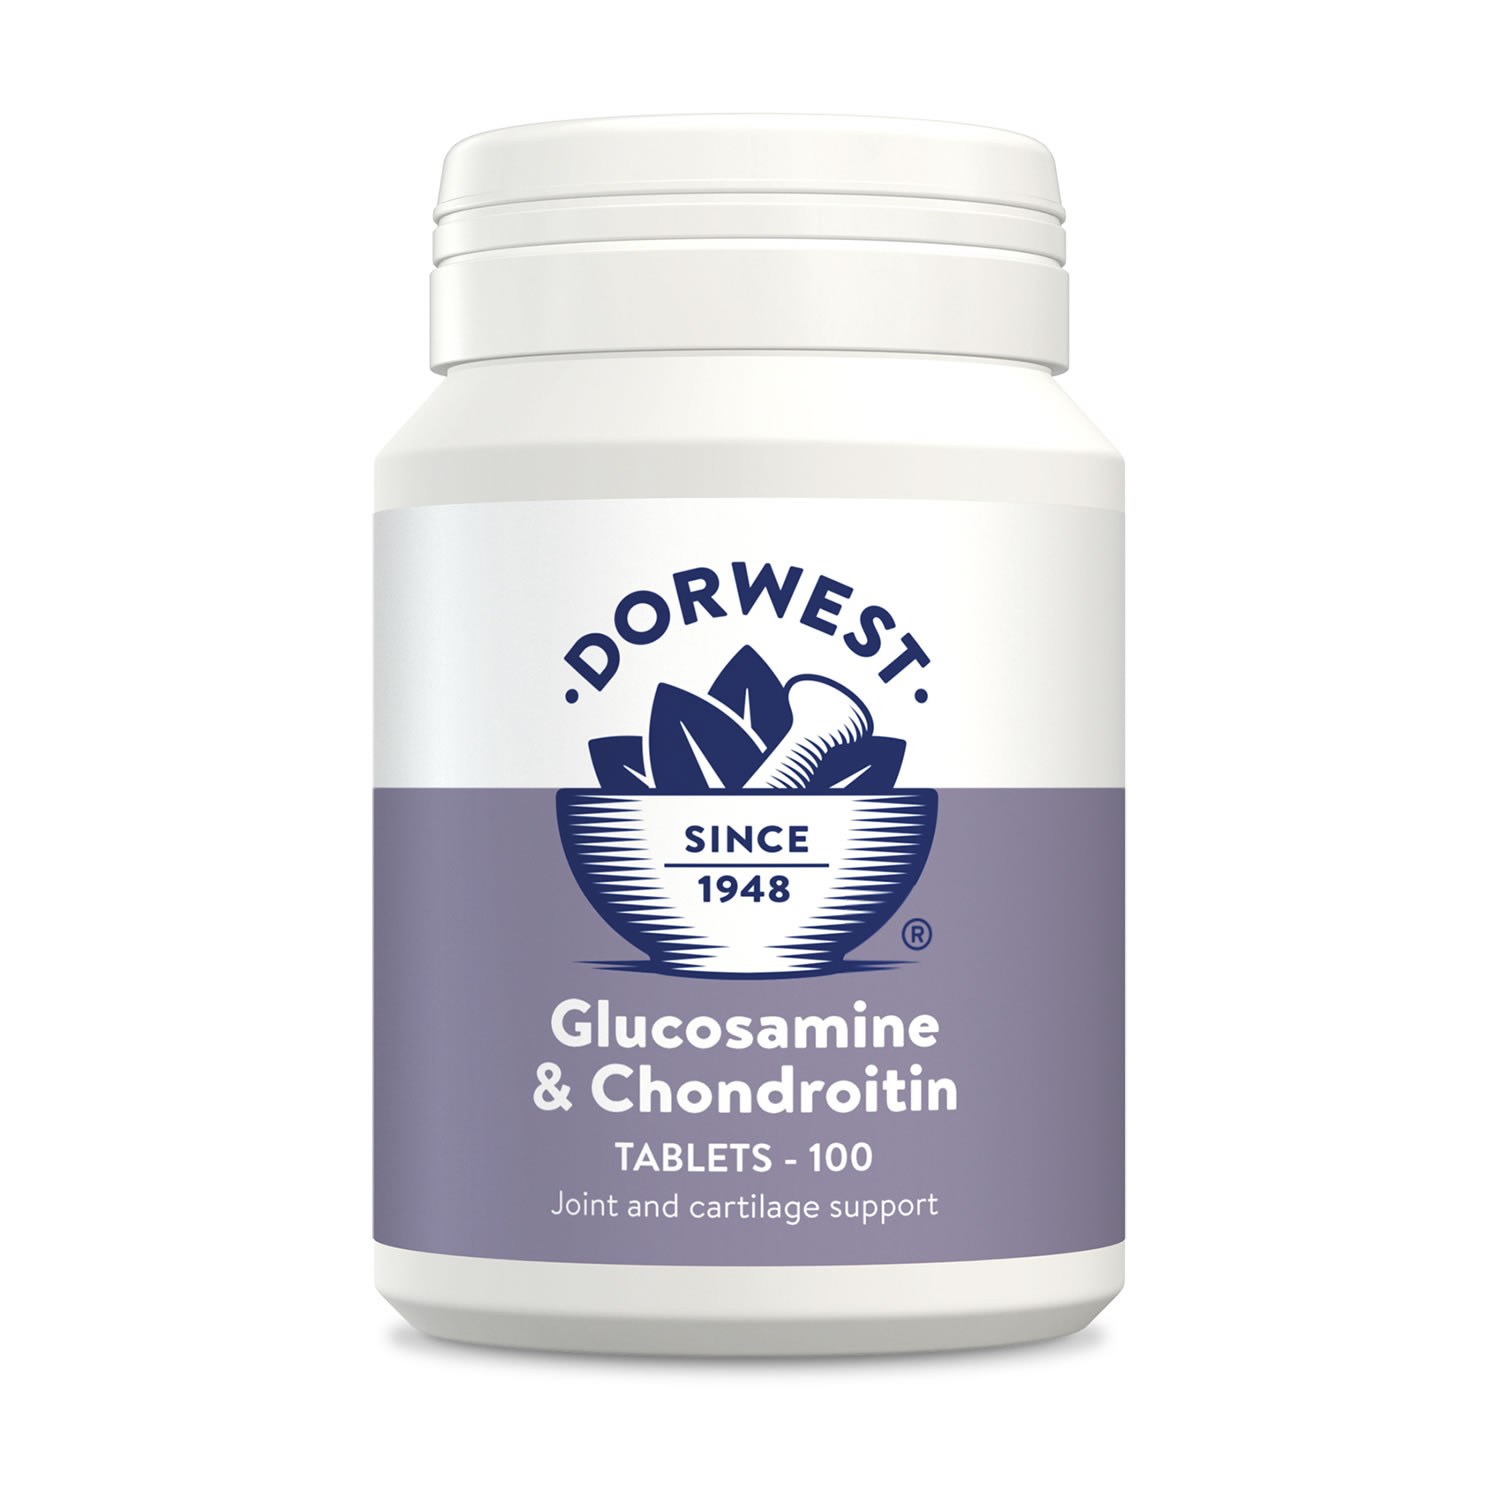 DORWEST HERBS GLUCOSAMINE & CHONDROITIN  100 TABLETS